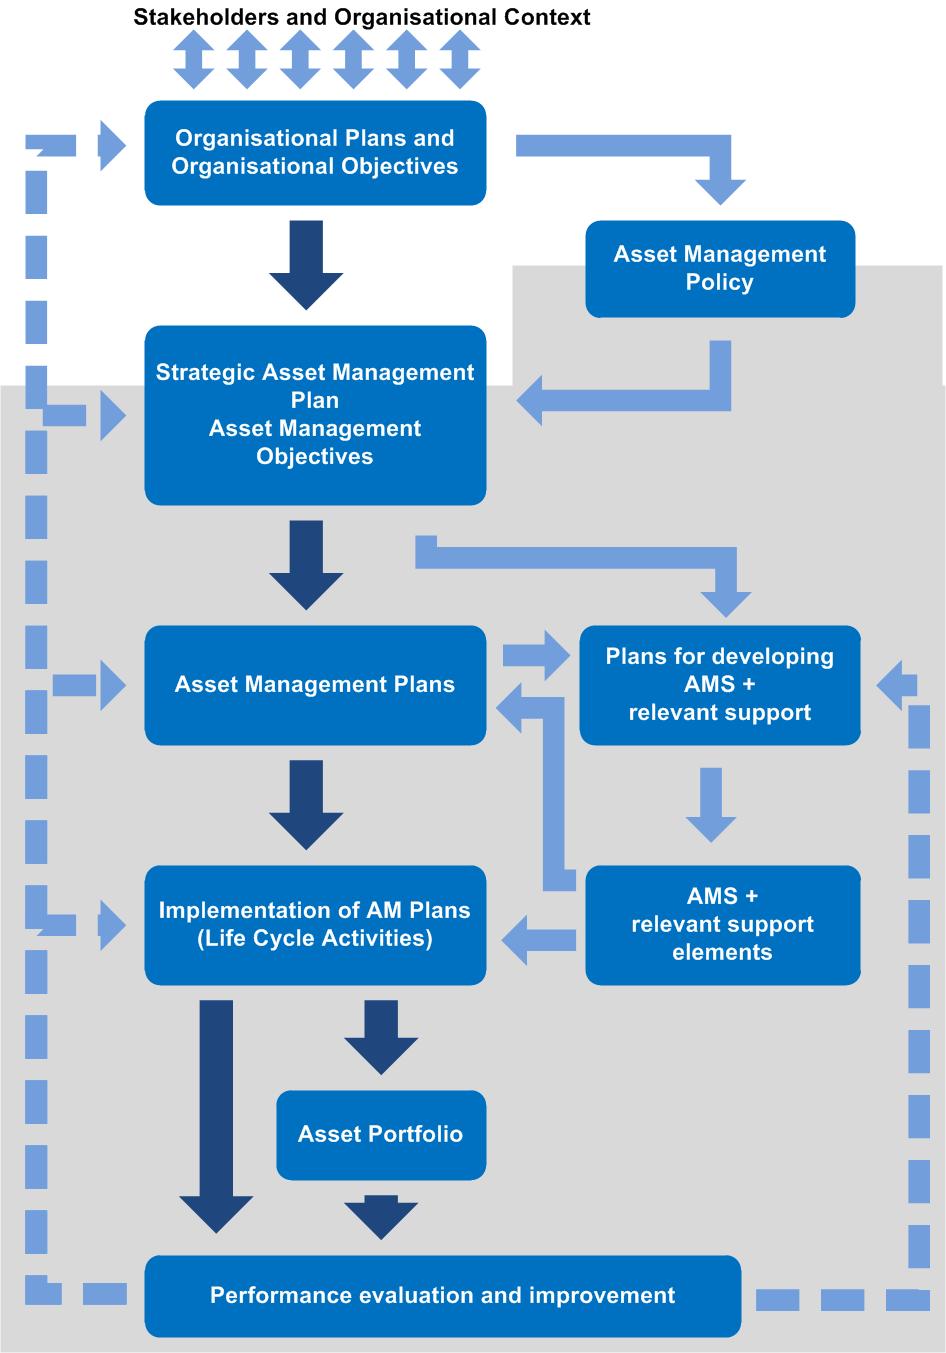 Asset Management System Context of the organisation Leadership